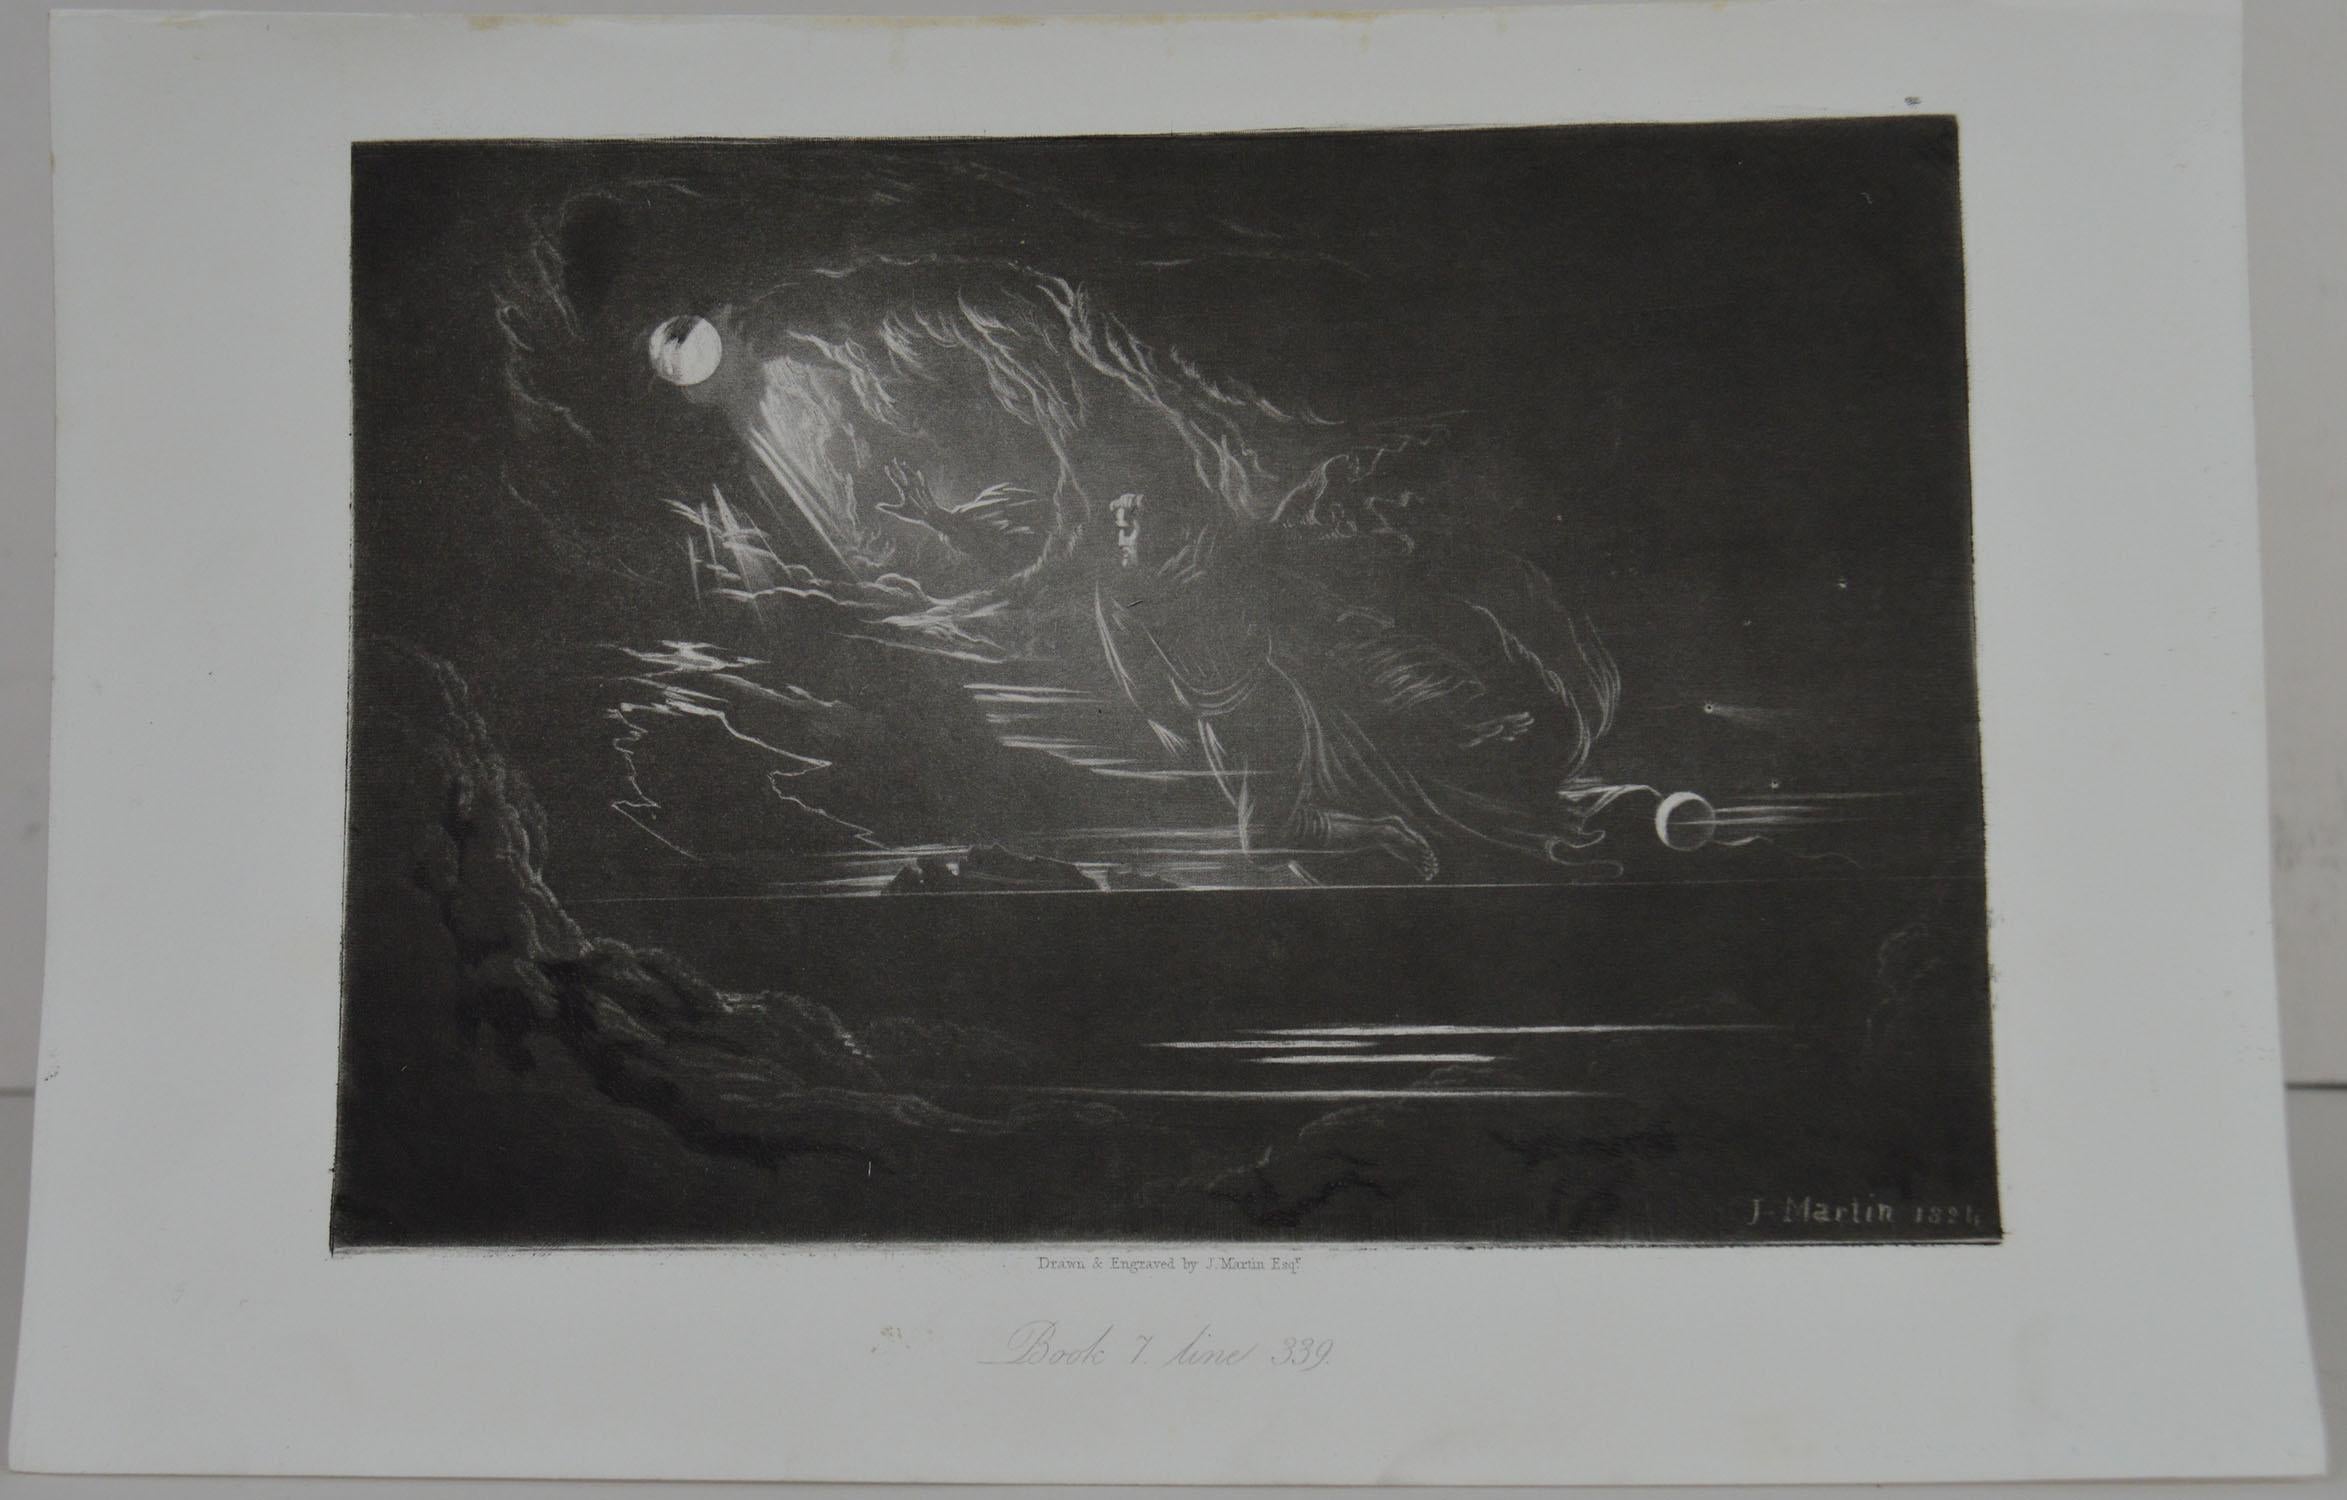 Sensational image by John Martin.

Titled Creation of Light

Drawn and engraved by John Martin. From the highly regarded Washbourne Publication of Milton's Paradise Lost, 1853.

Unframed.

 